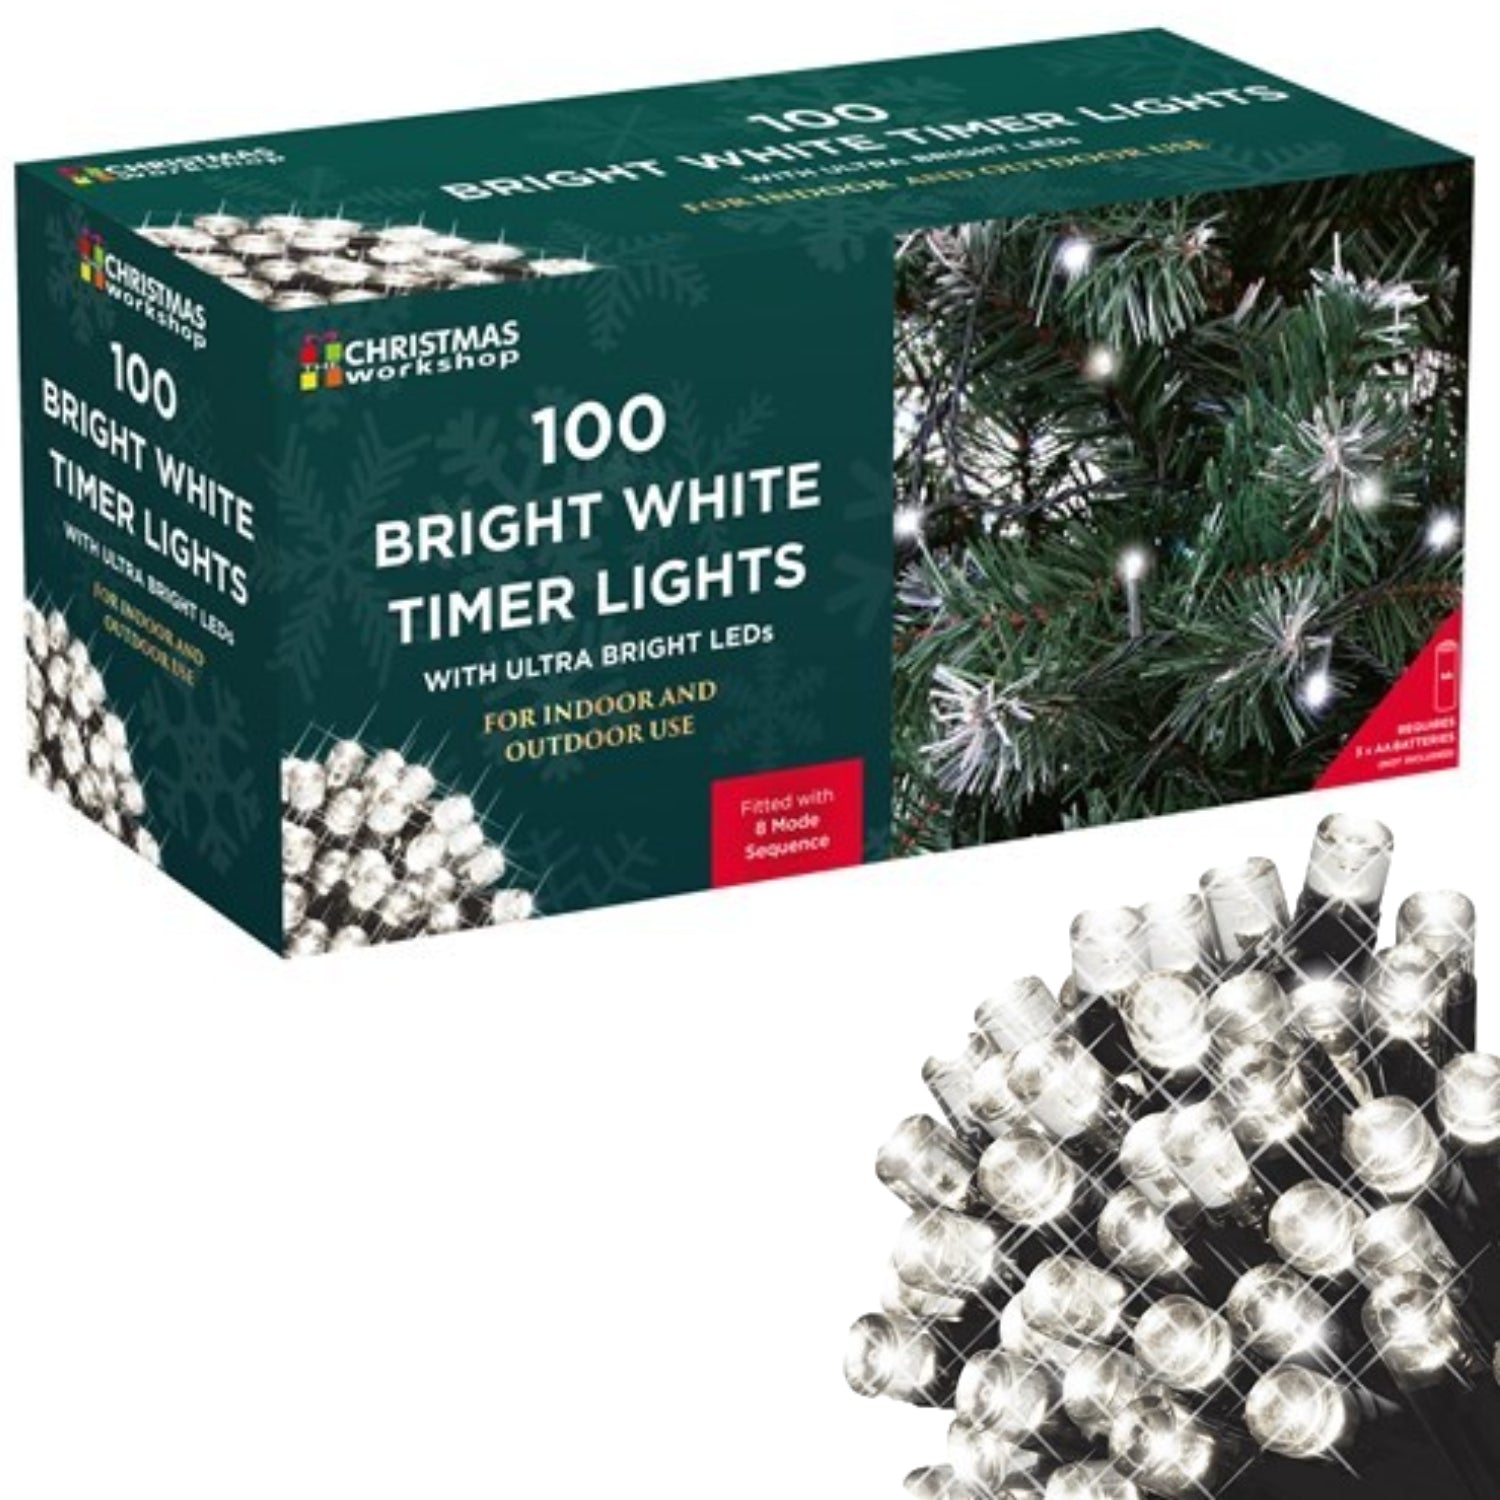 100 LED Bright White Christmas 8 Mode Sequence Timer Fairy Lights